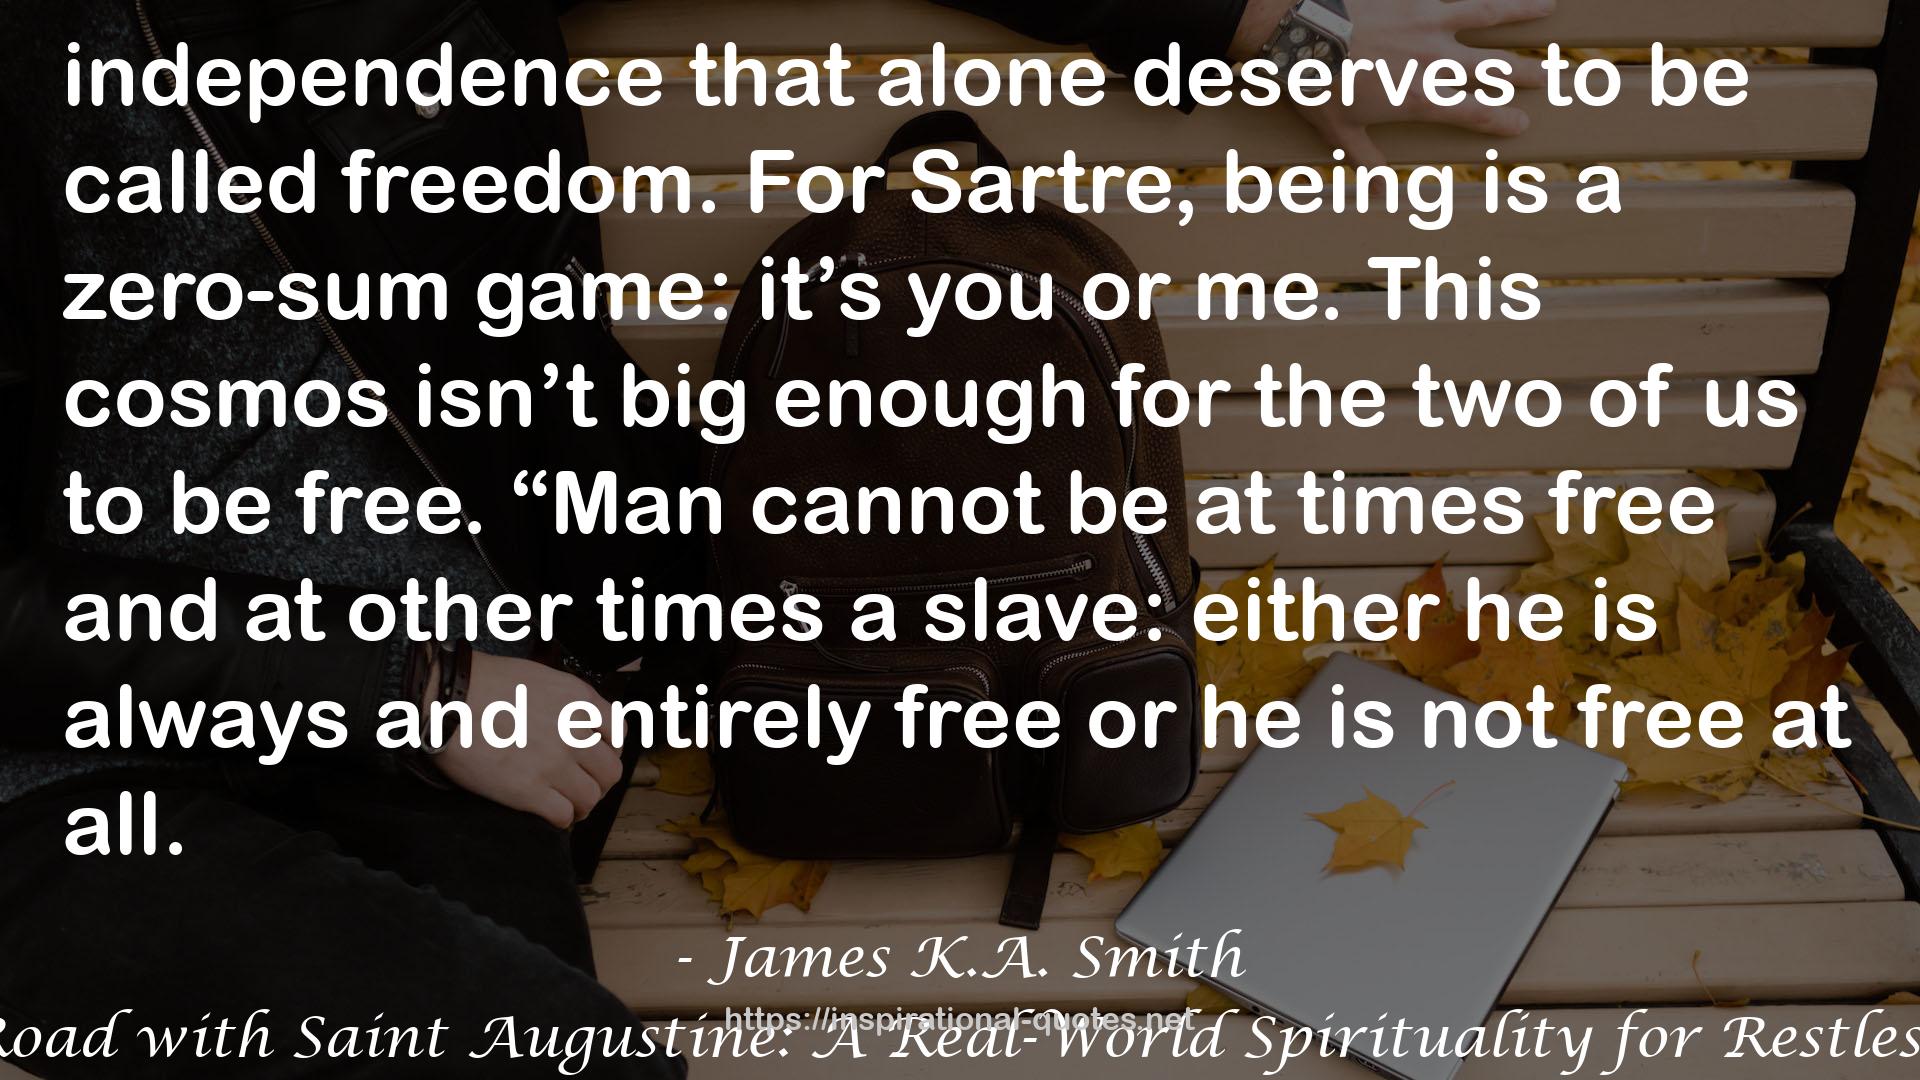 On the Road with Saint Augustine: A Real-World Spirituality for Restless Hearts QUOTES